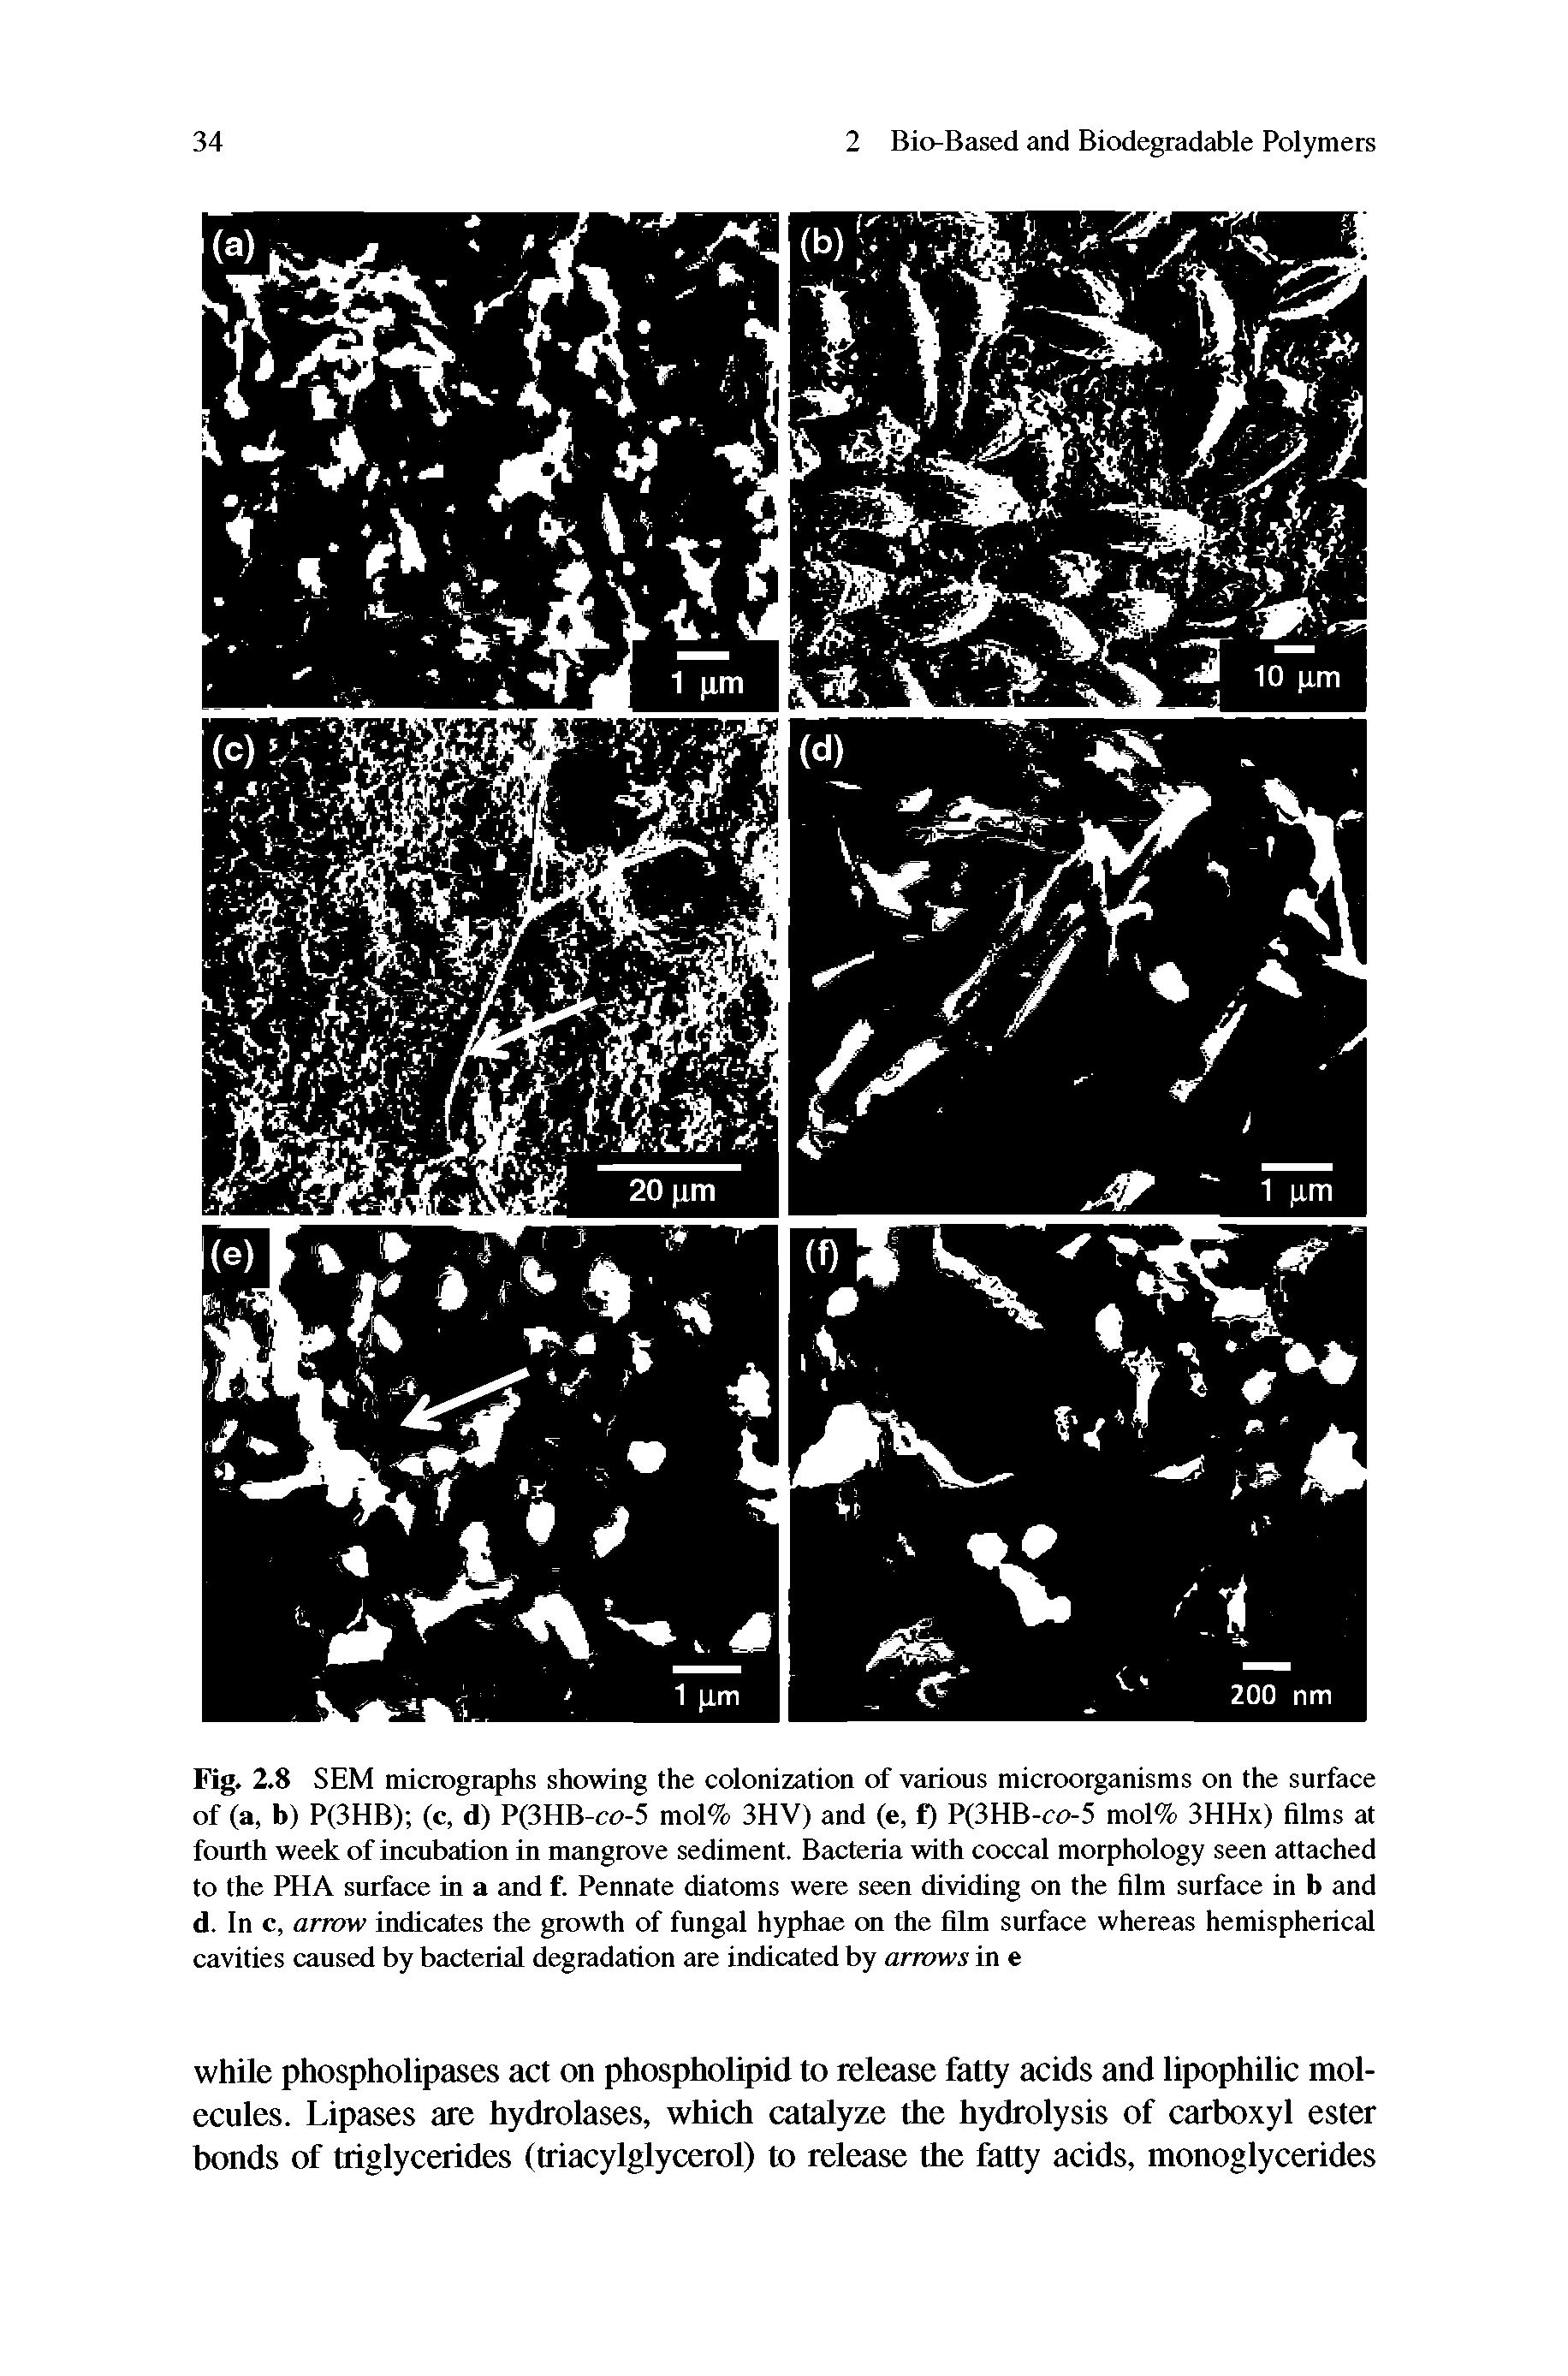 Fig. 2.8 SEM micrographs showing the colonization of various microorganisms on the surface of (a, b) P(3HB) (c, d) P(3HB-co-5 mol% 3HV) and (e, f) P(3HB-co-5 mol% 3HHx) films at fourth week of incubation in mangrove sediment. Bacteria with coccal morphology seen attached to the PHA surface in a and f. Pennate diatoms were seen dividing on the film surface in b and d. In c, arrow indicates the growth of fungal hyphae on the film surface whereas hemispherical cavities caused by bacterial degradation are indicated by arrows in e...